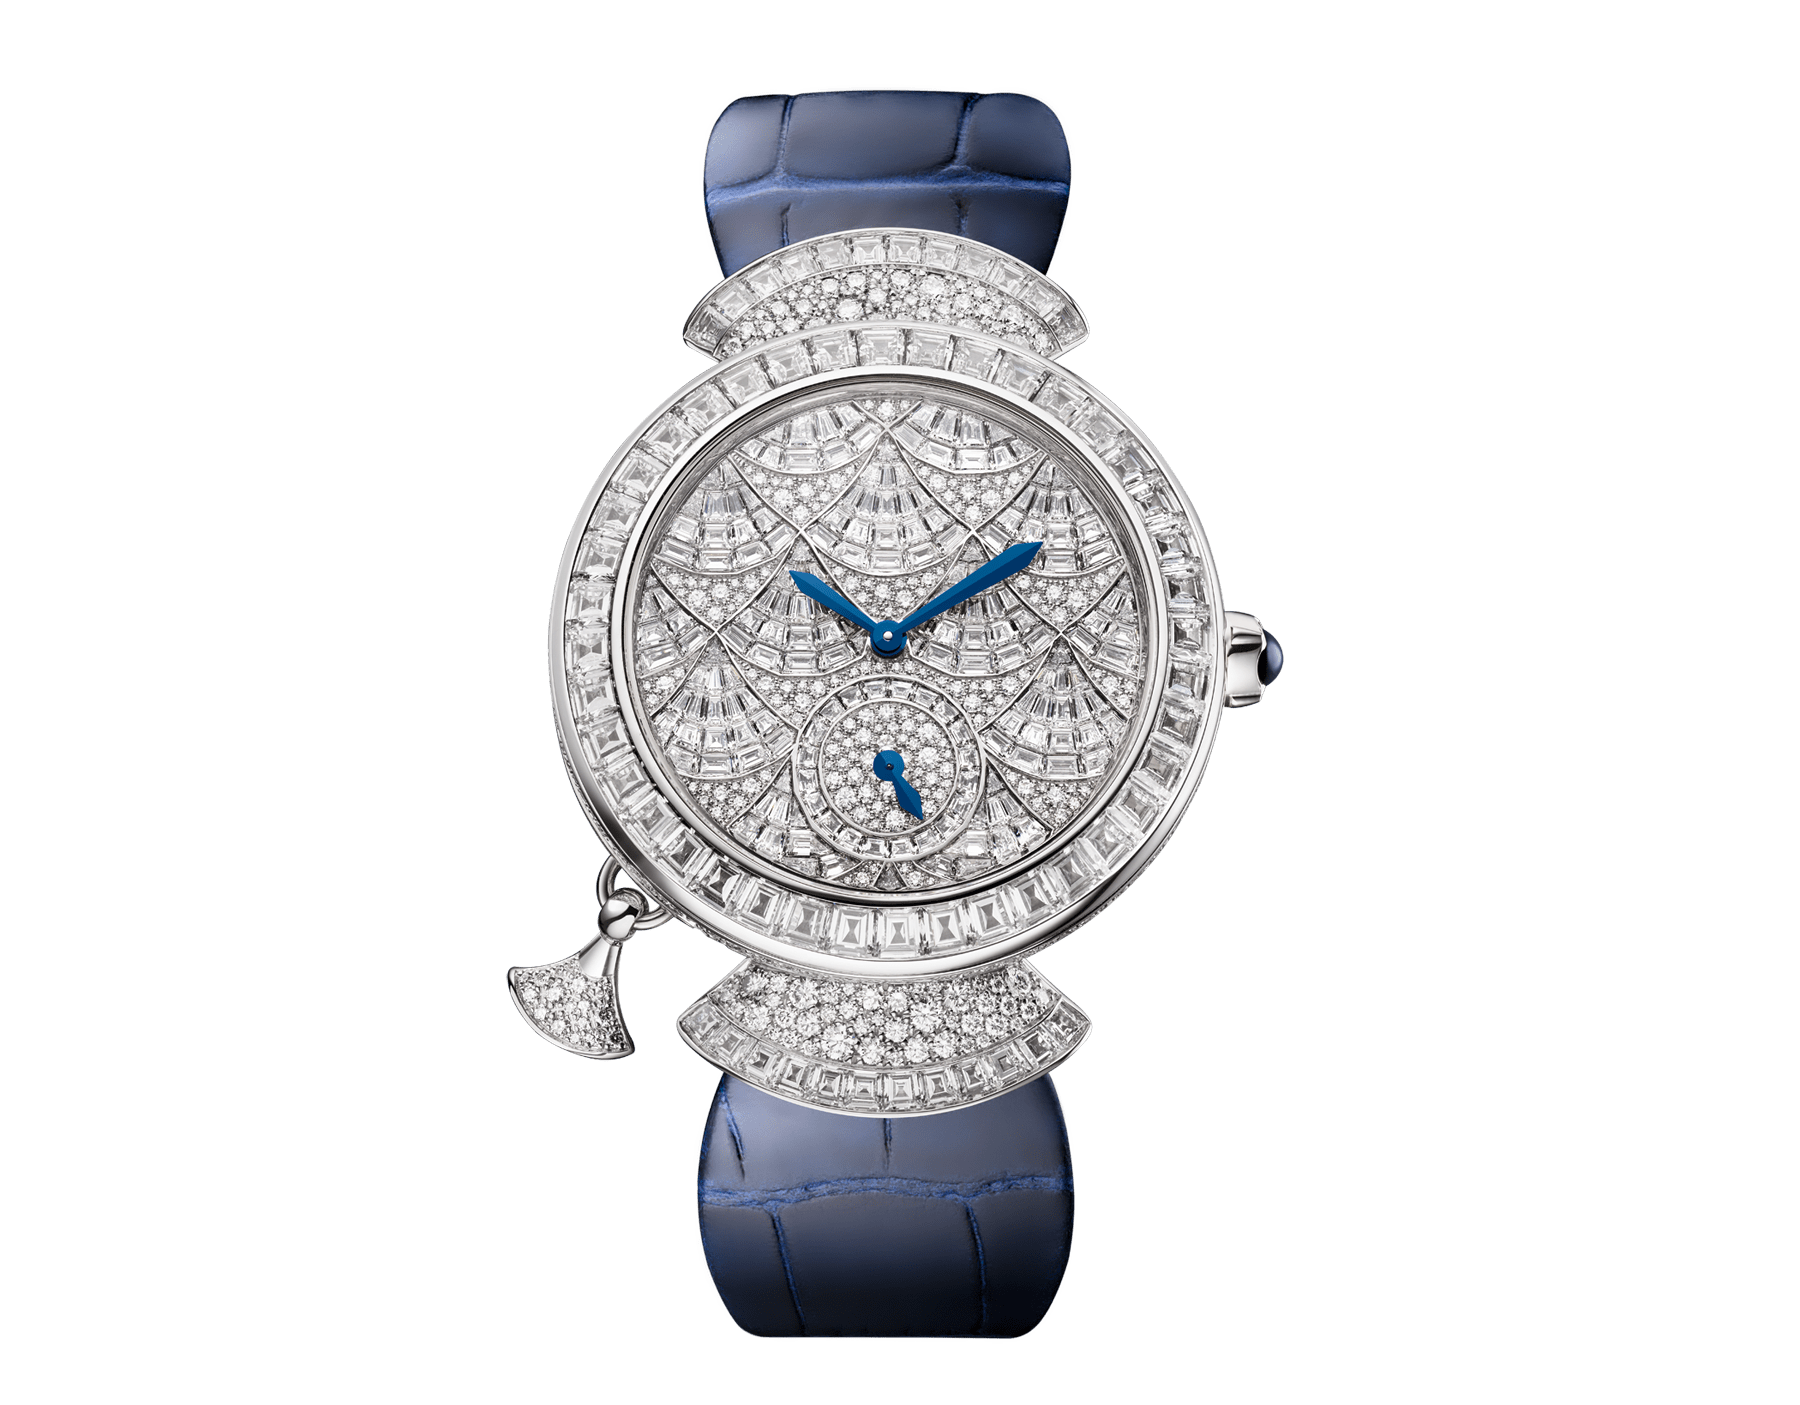 DIVAS' DREAM Finissima Mosaica watch with extra-thin mechanical manufacture movement with minute repeater, 2 hammers (manual winding), 37 mm 18 kt white gold case fully set with snow-pavé and baguette-cut diamonds, dial set with baguette and brilliant-cut diamonds, blue hands, transparent caseback and blue alligator bracelet 103497 image 1